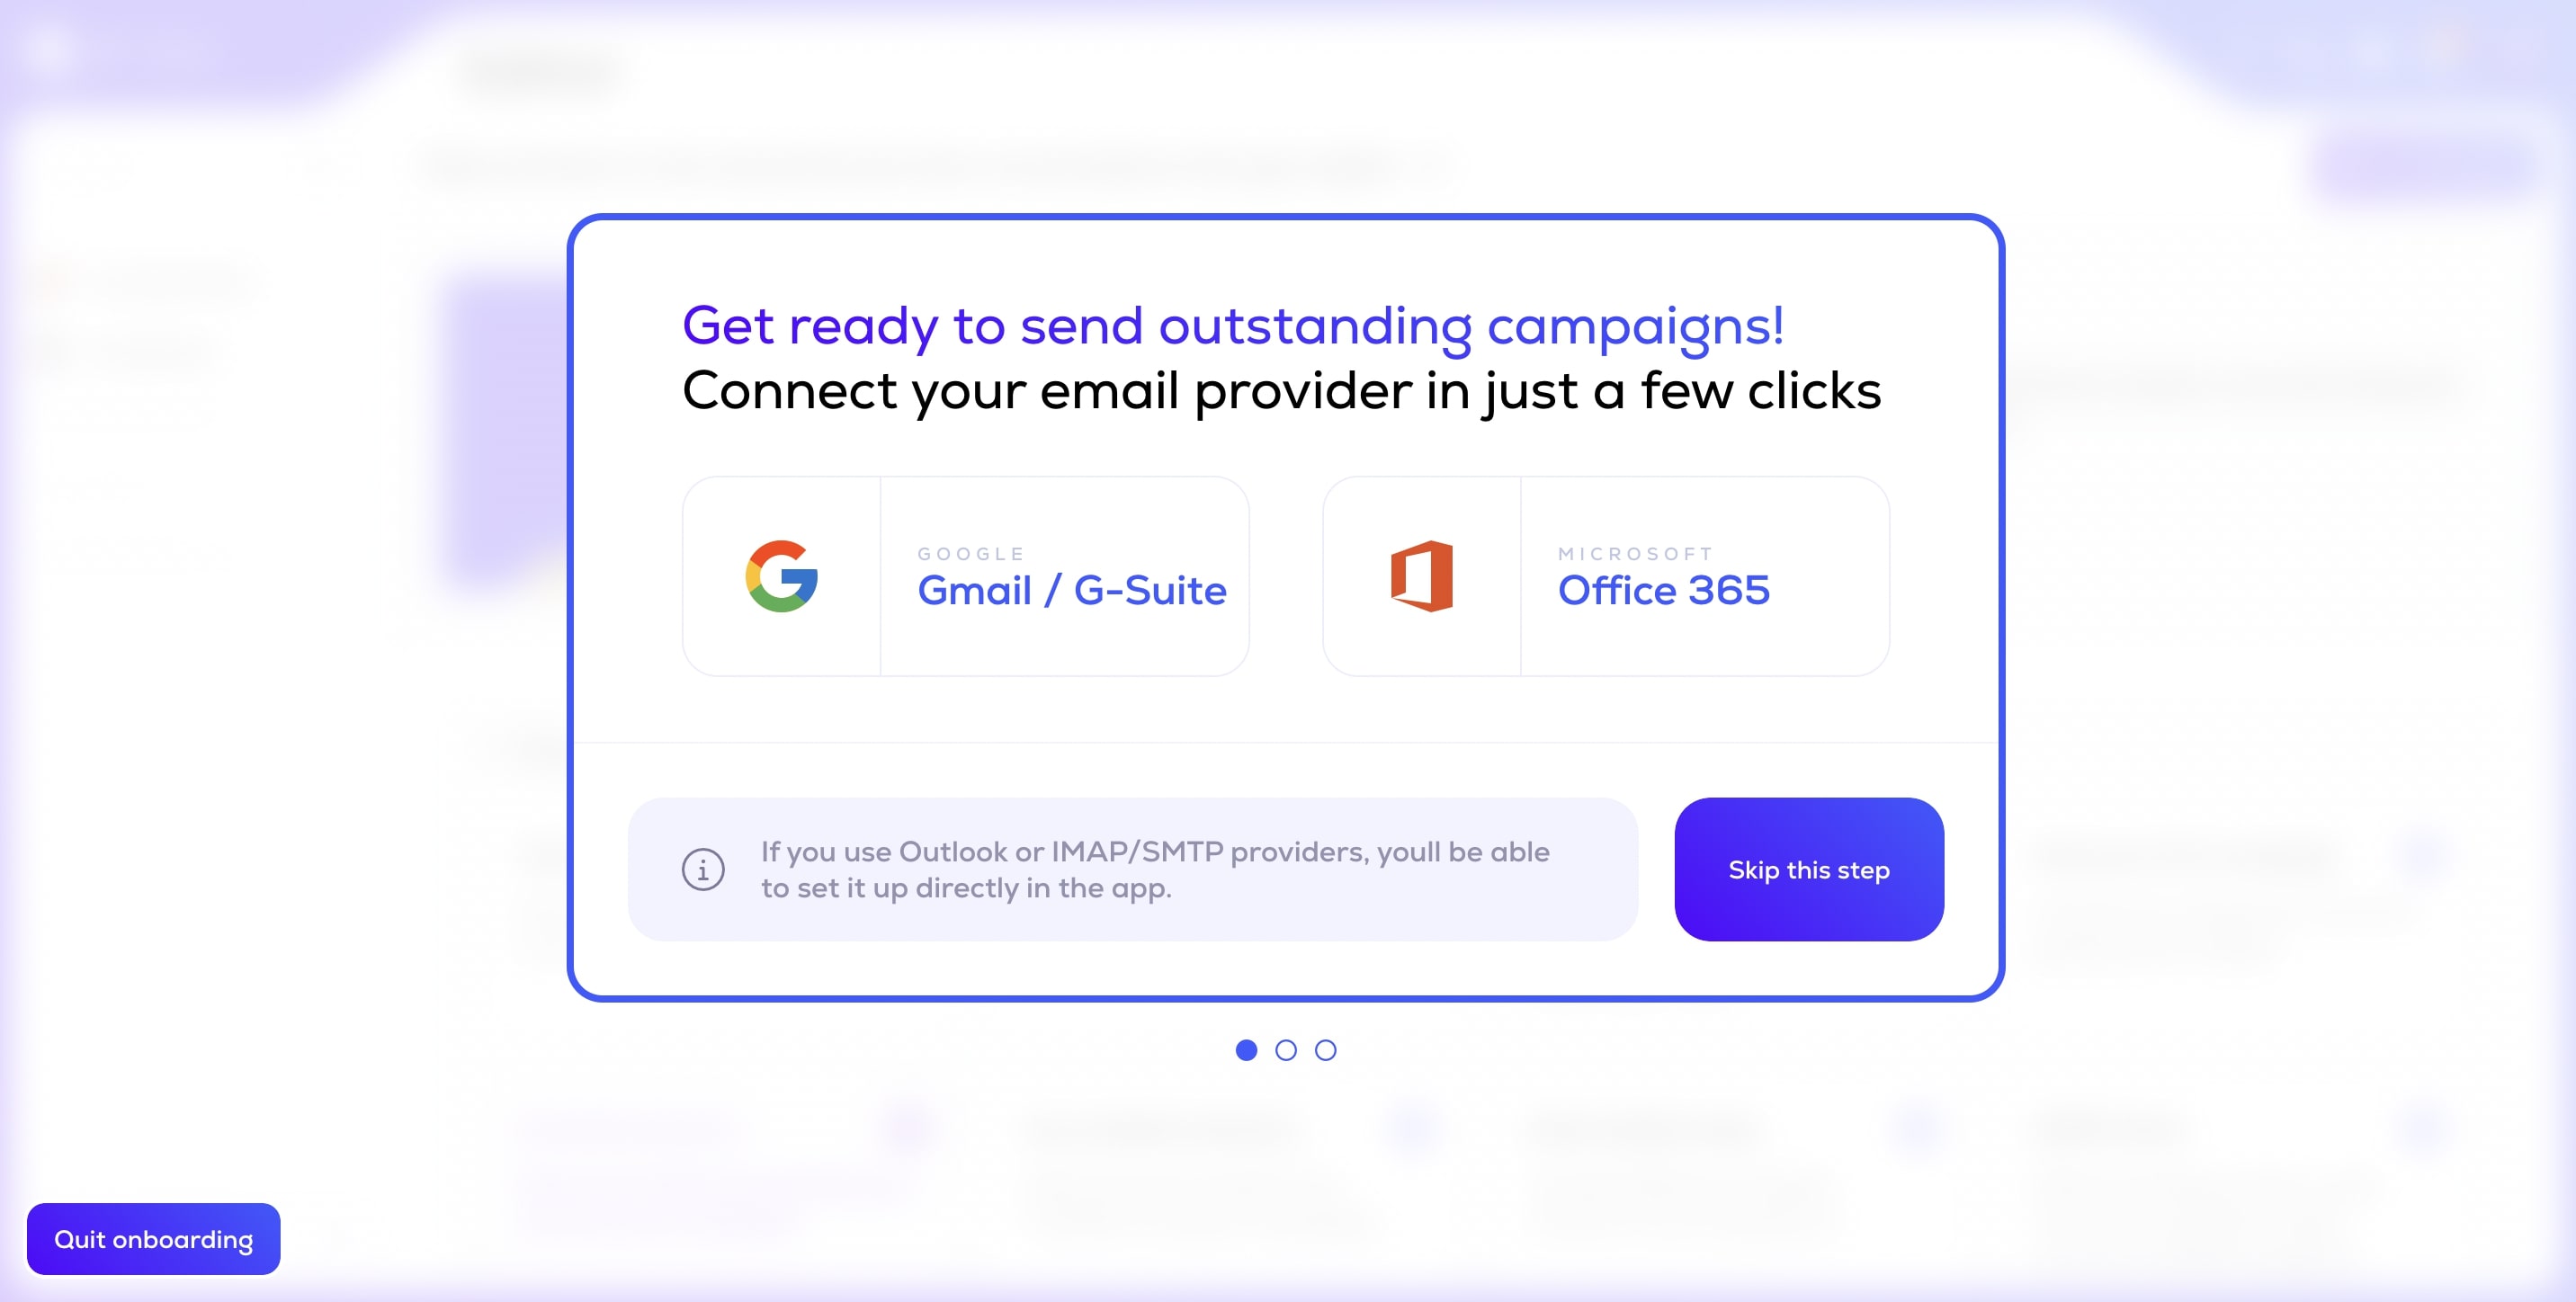 Add your email provider to Lemlist